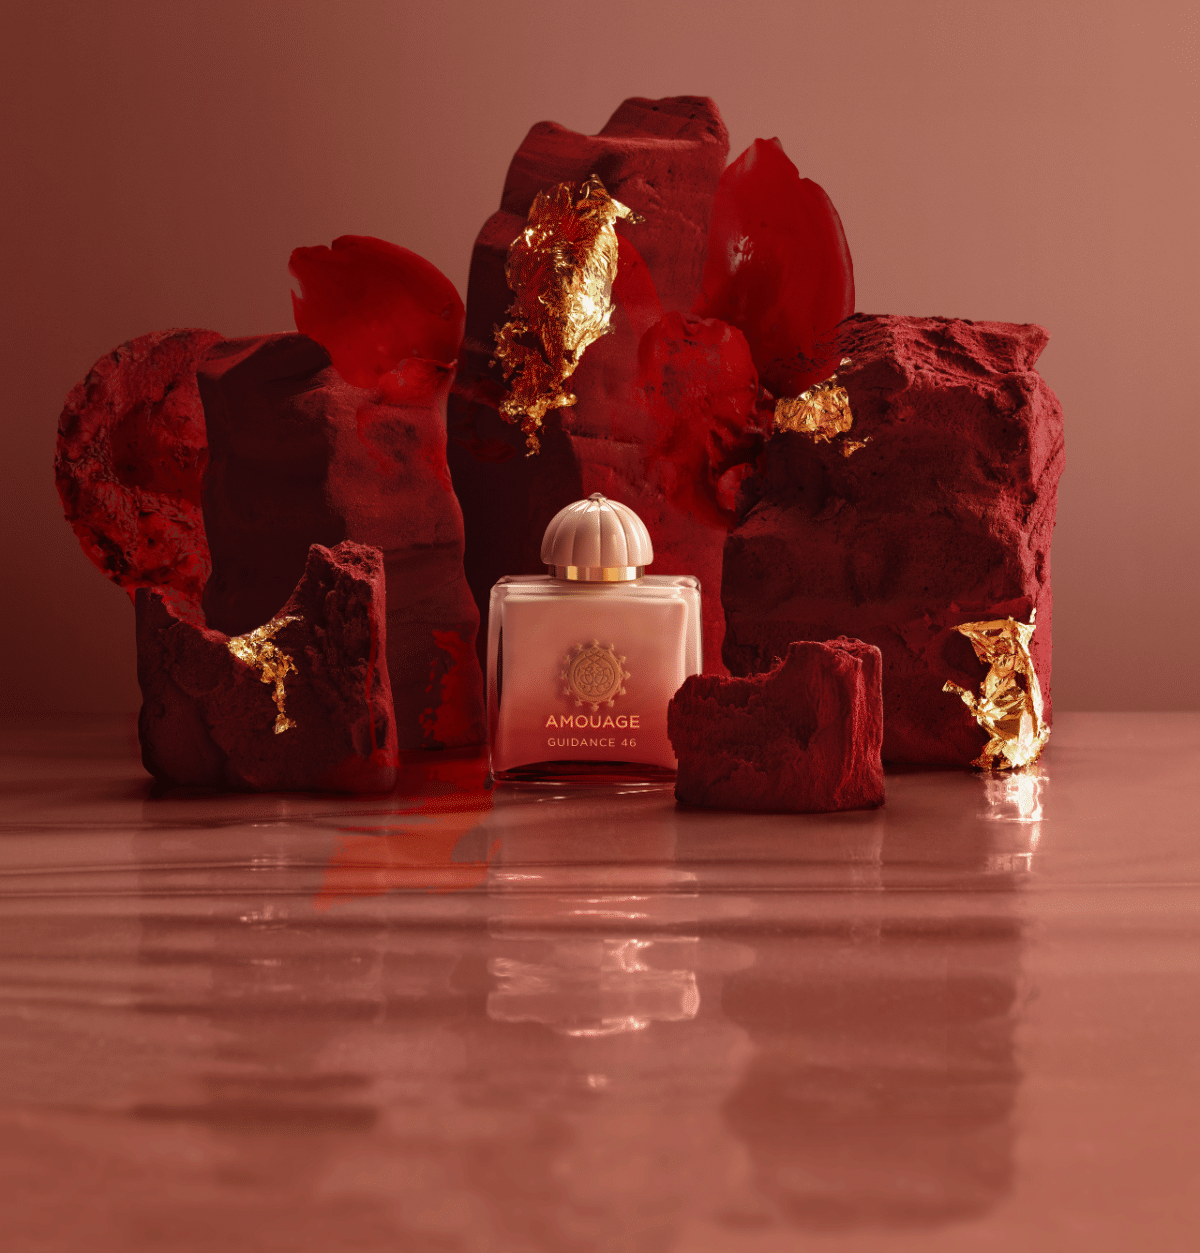 Why We Can’t Wait To Add Amouage’s Guidance 46 To Our Fragrance Collection